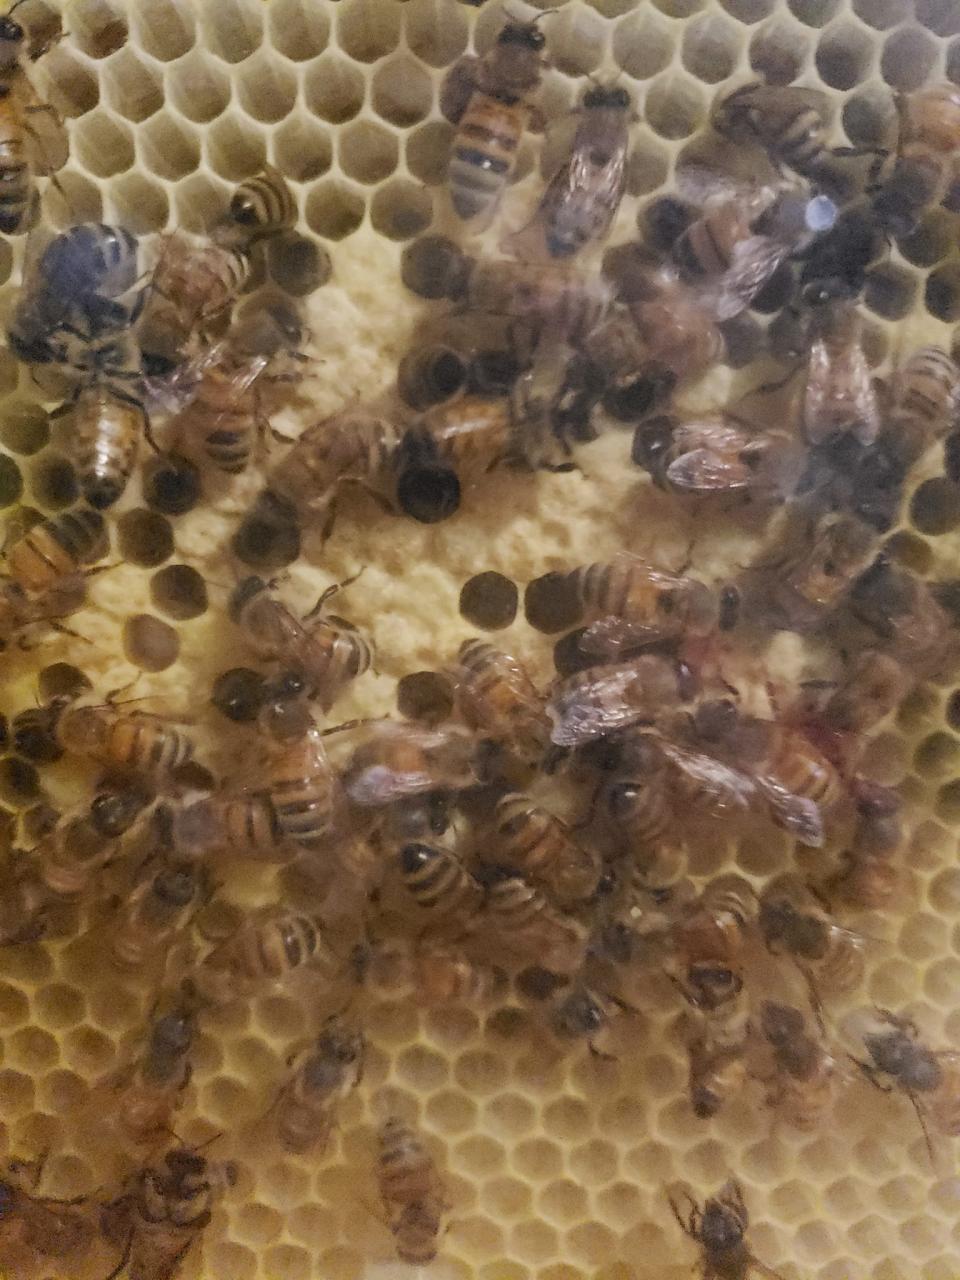 Honeybees inside the new hive at the McKinley Presidential Library & Museum are beginning to create honeycomb and produce their own honey, museum officials said.